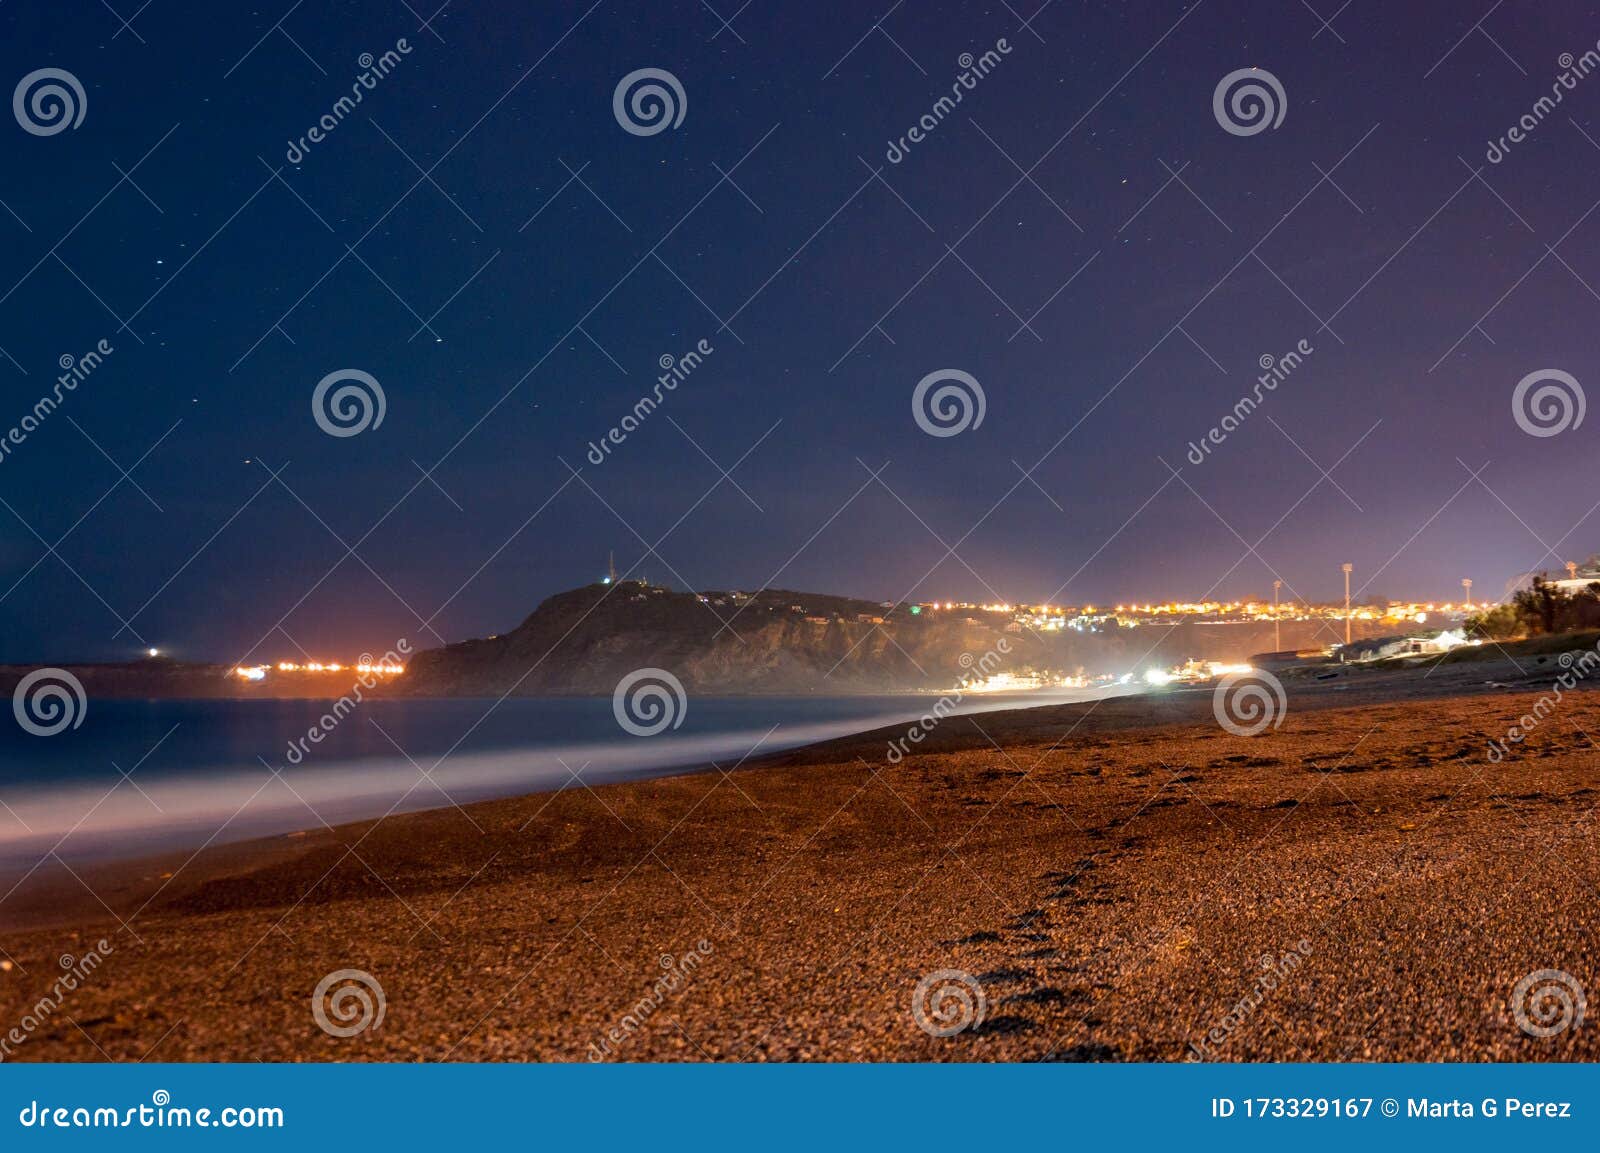 footprints leading to the little foggy tono`s bay or baia del tono. silk effect and some stars in the background. sicily, italy